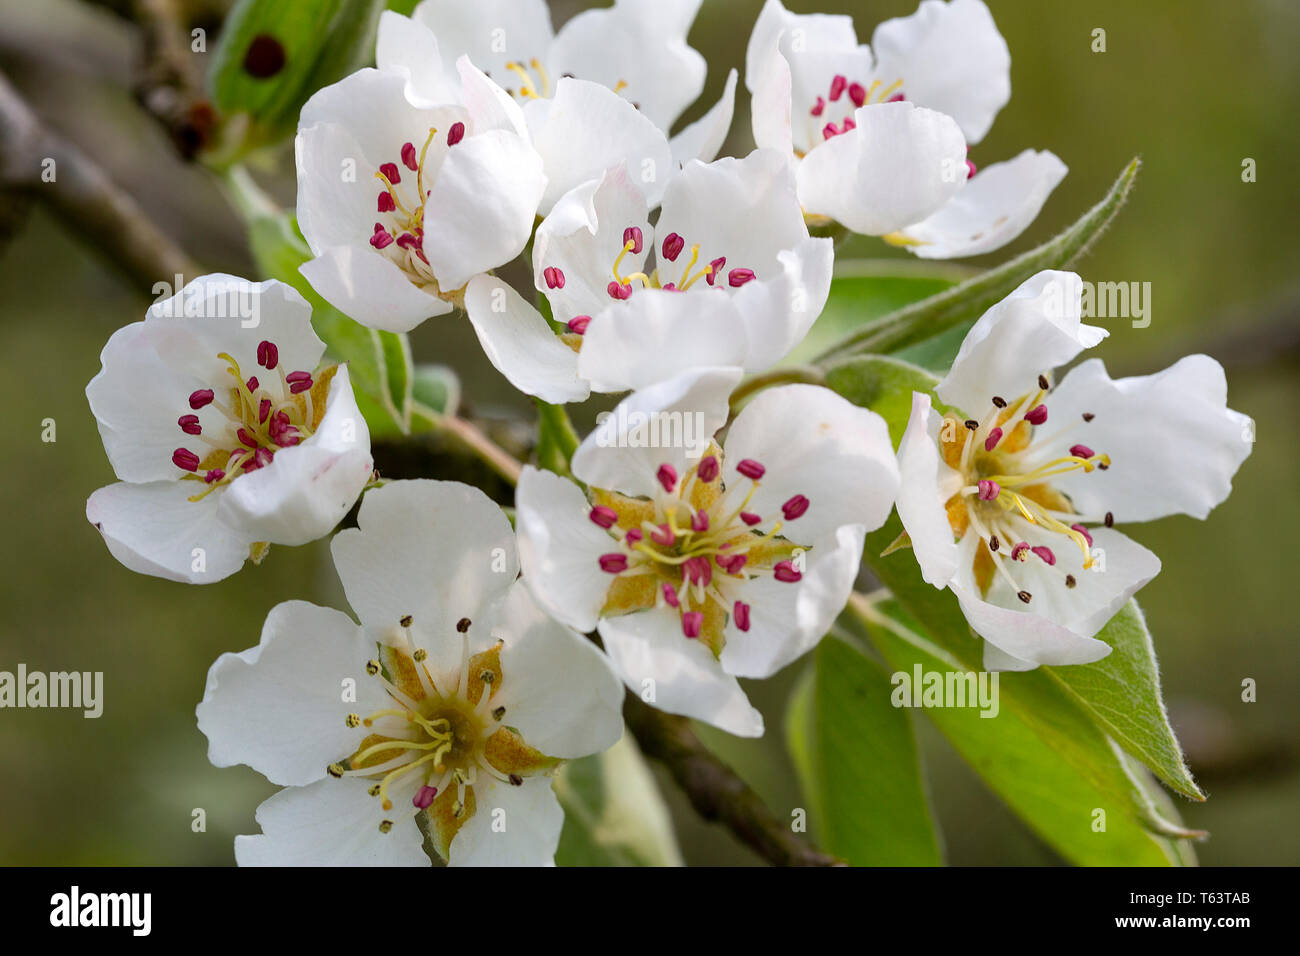 Blossom of pear tree (Pyrus sp.) Stock Photo